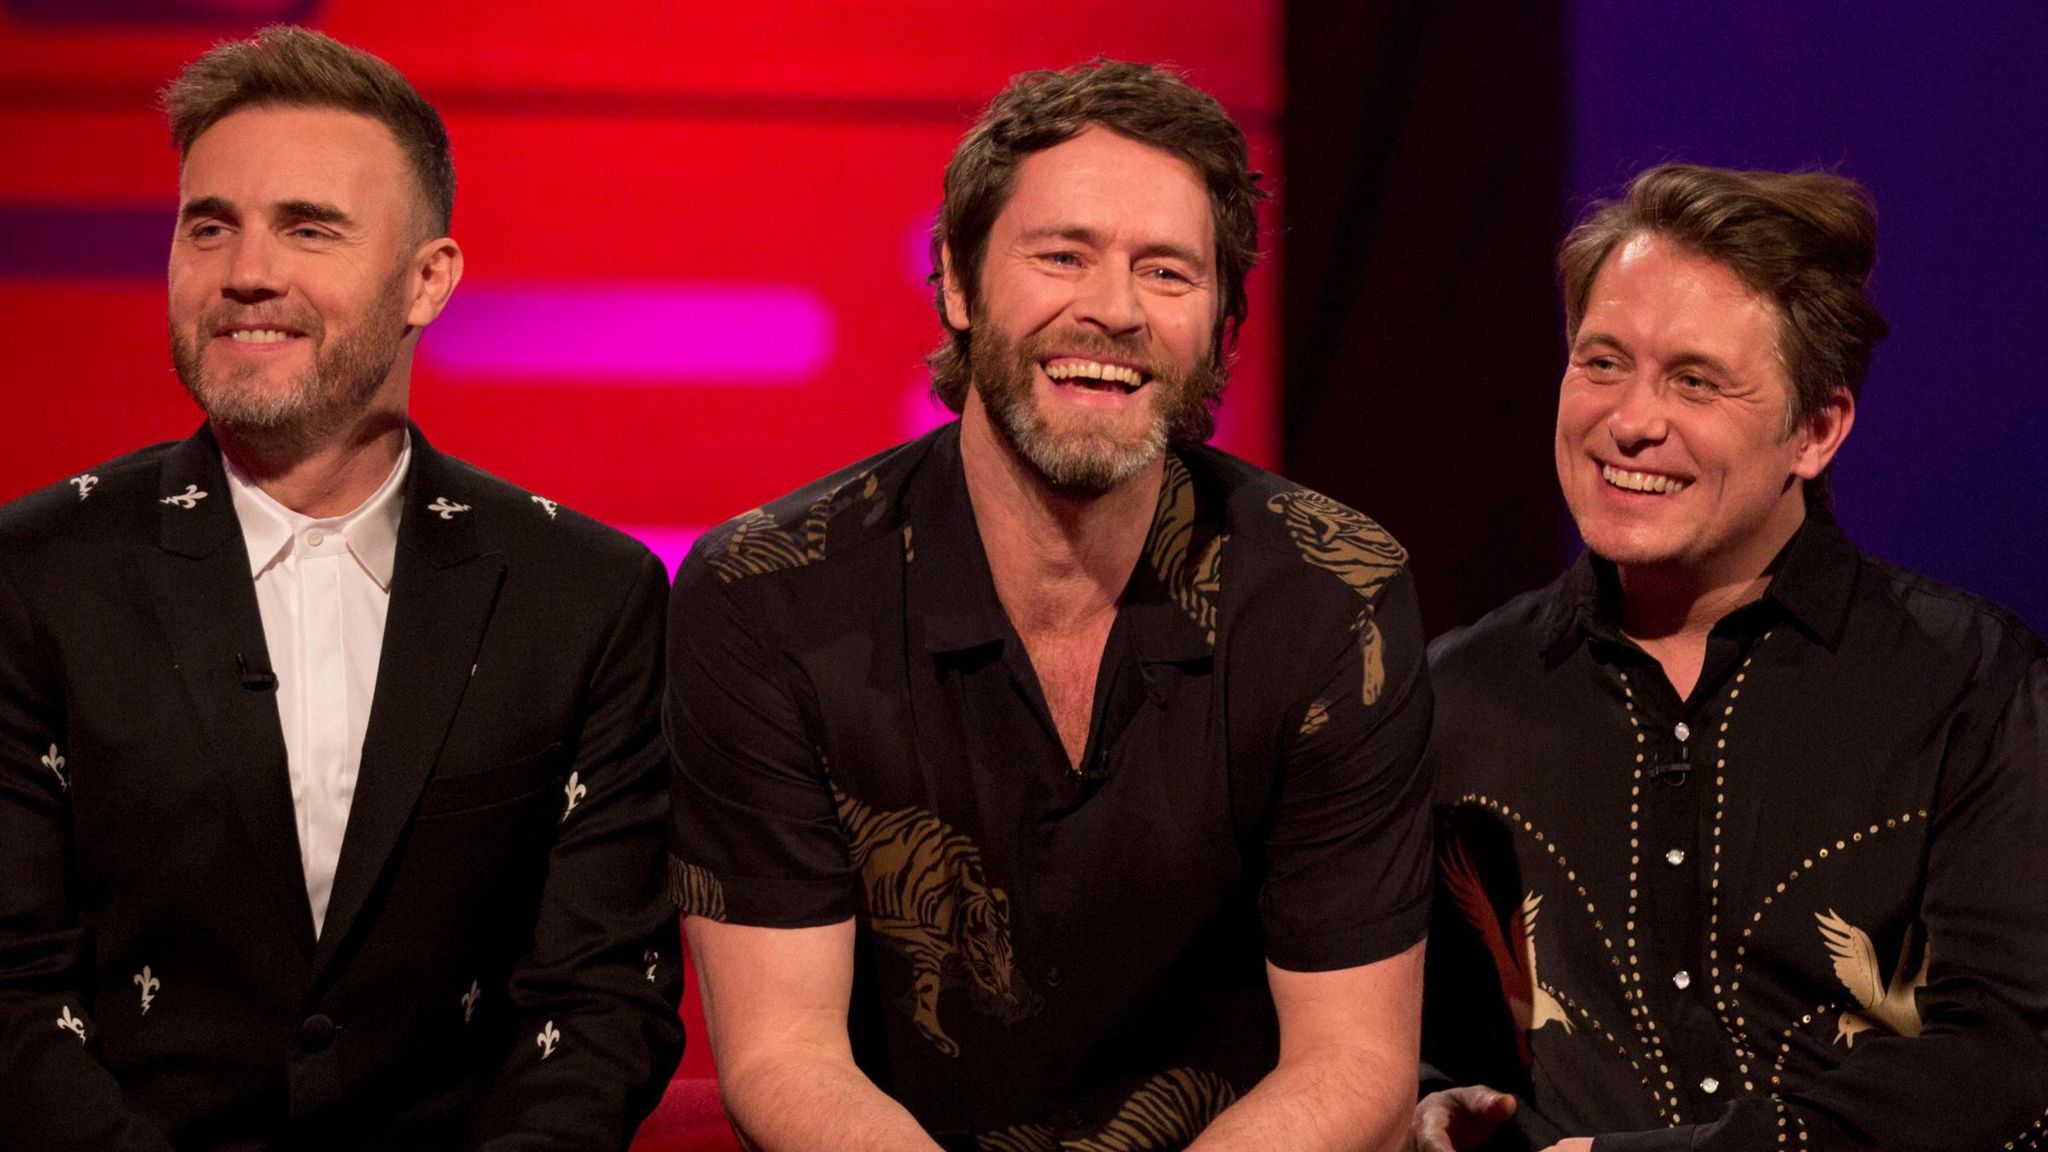 Gary Barlow, Howard Donald and Mark Owen on The Graham Norton Show in 2017